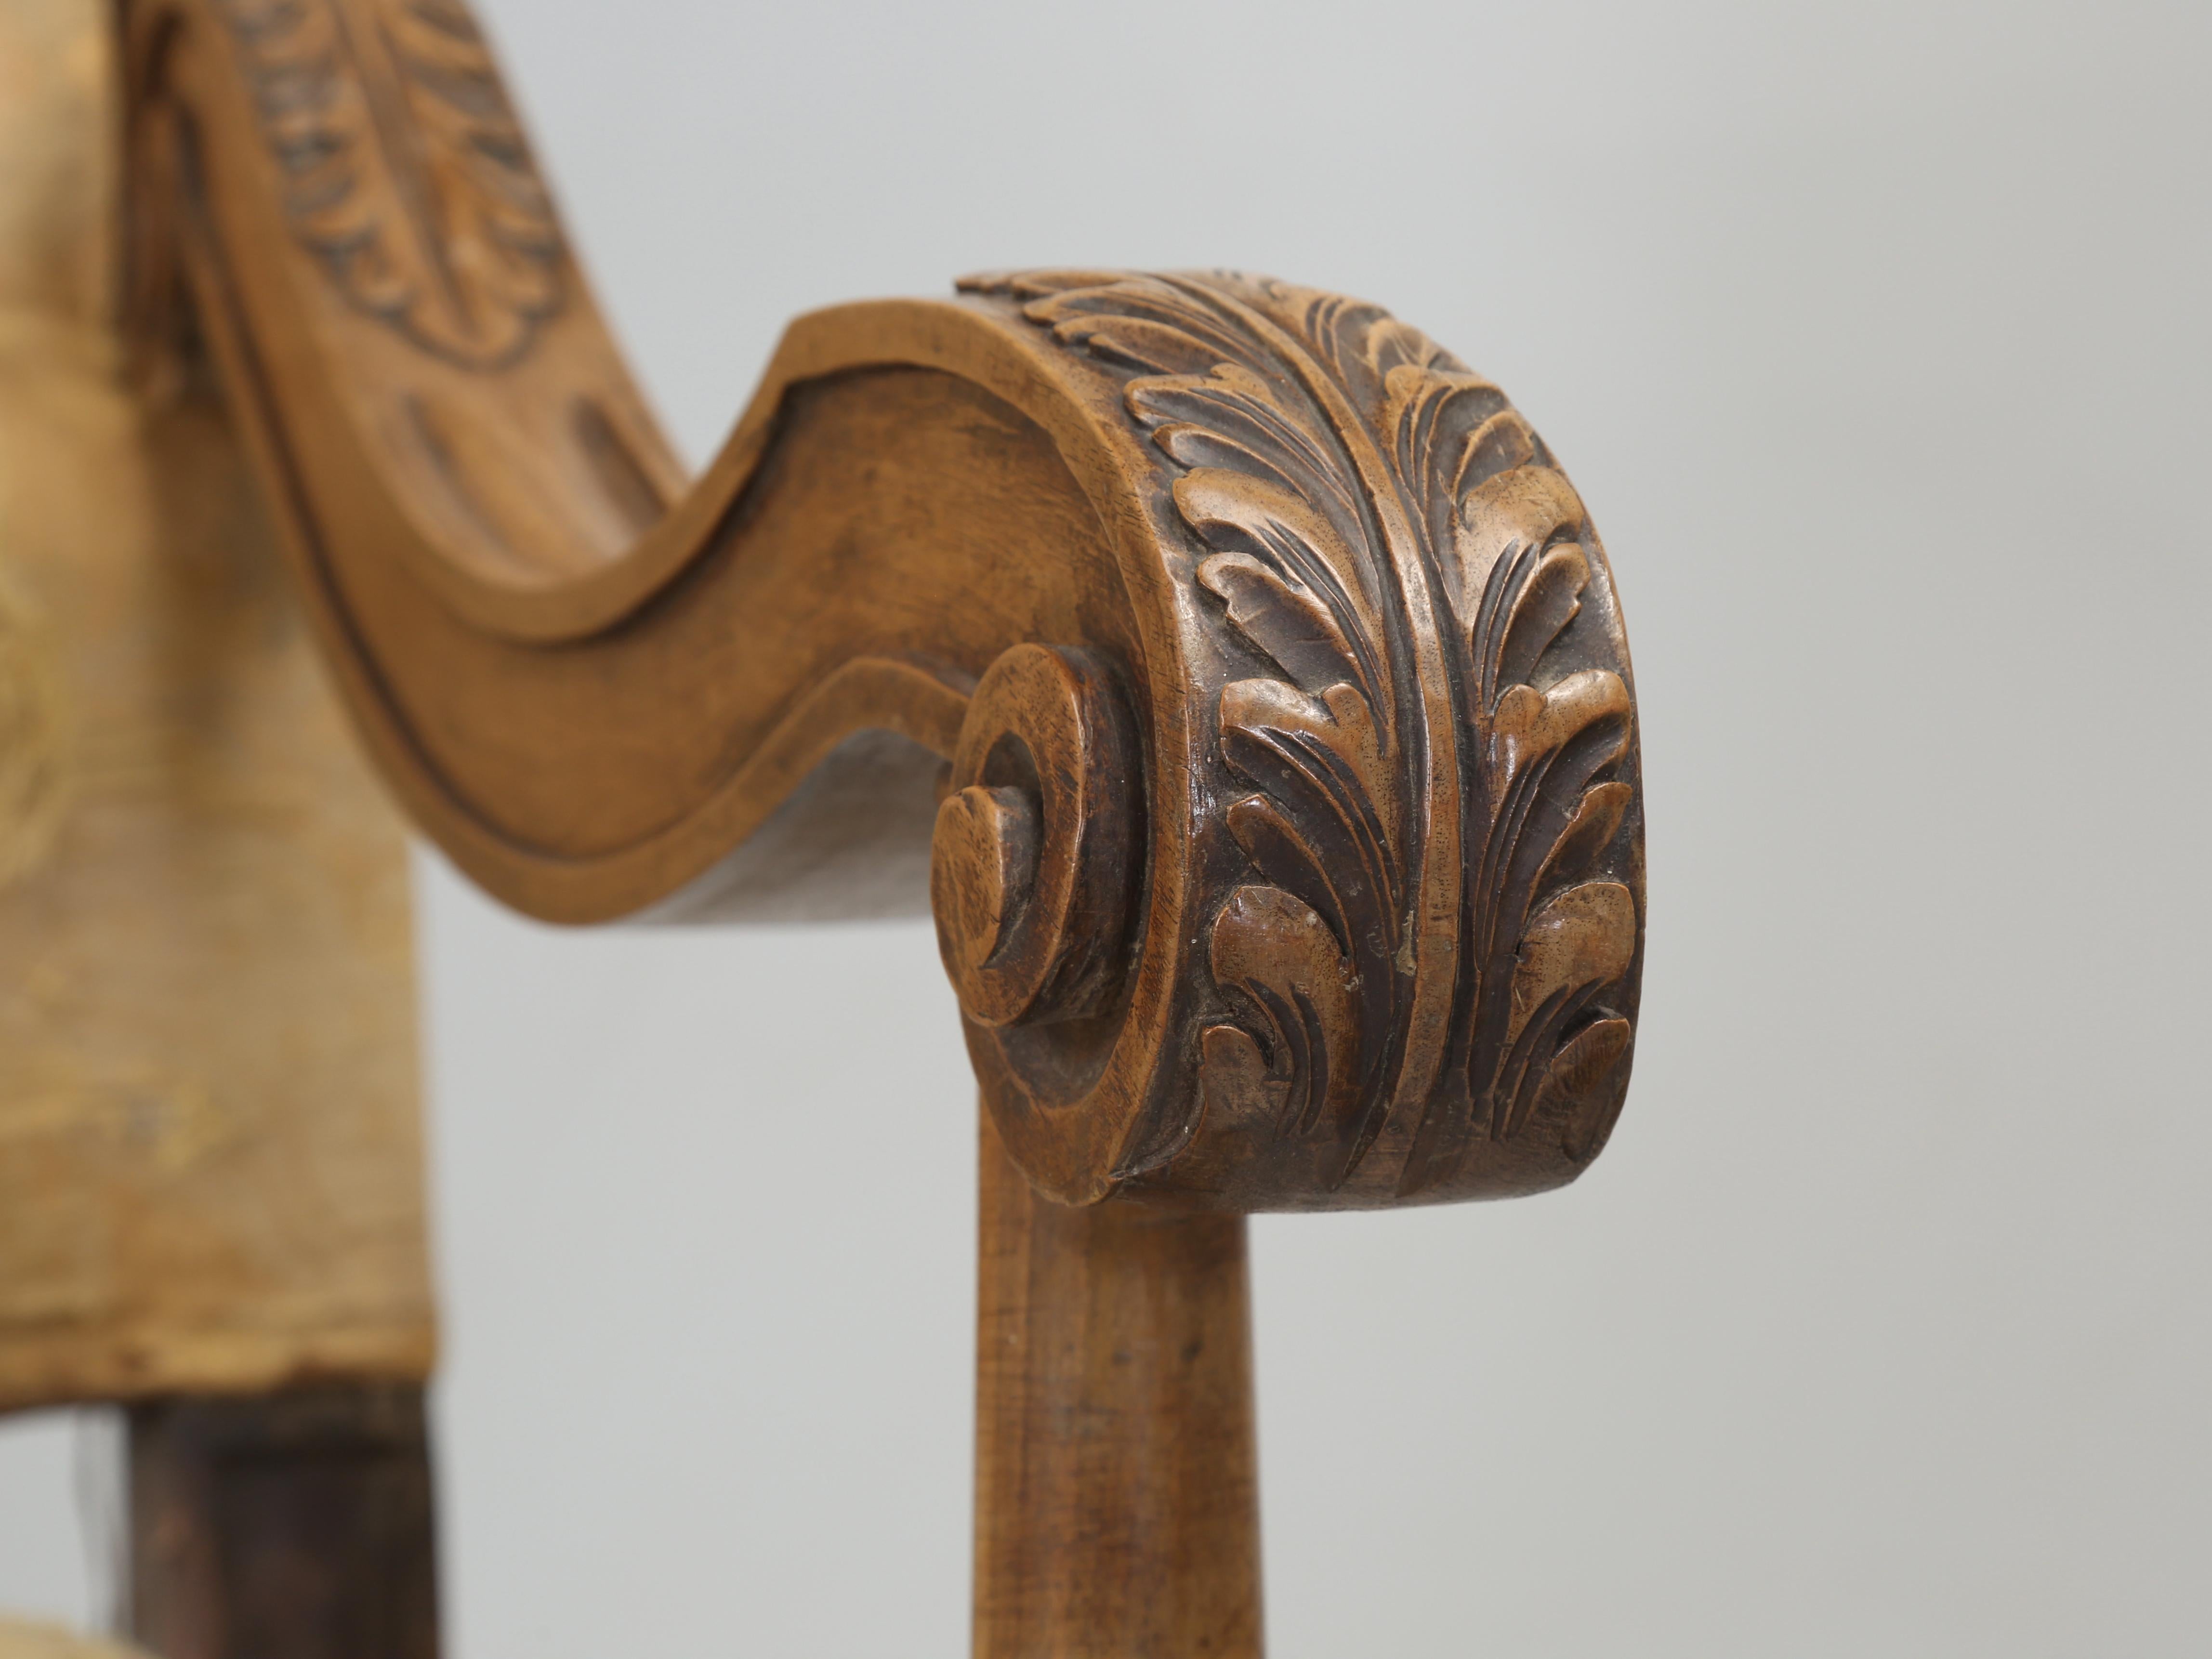 Antique Pair of Italian Armchairs Hand Carved Walnut Require Restoration, C1880s For Sale 2